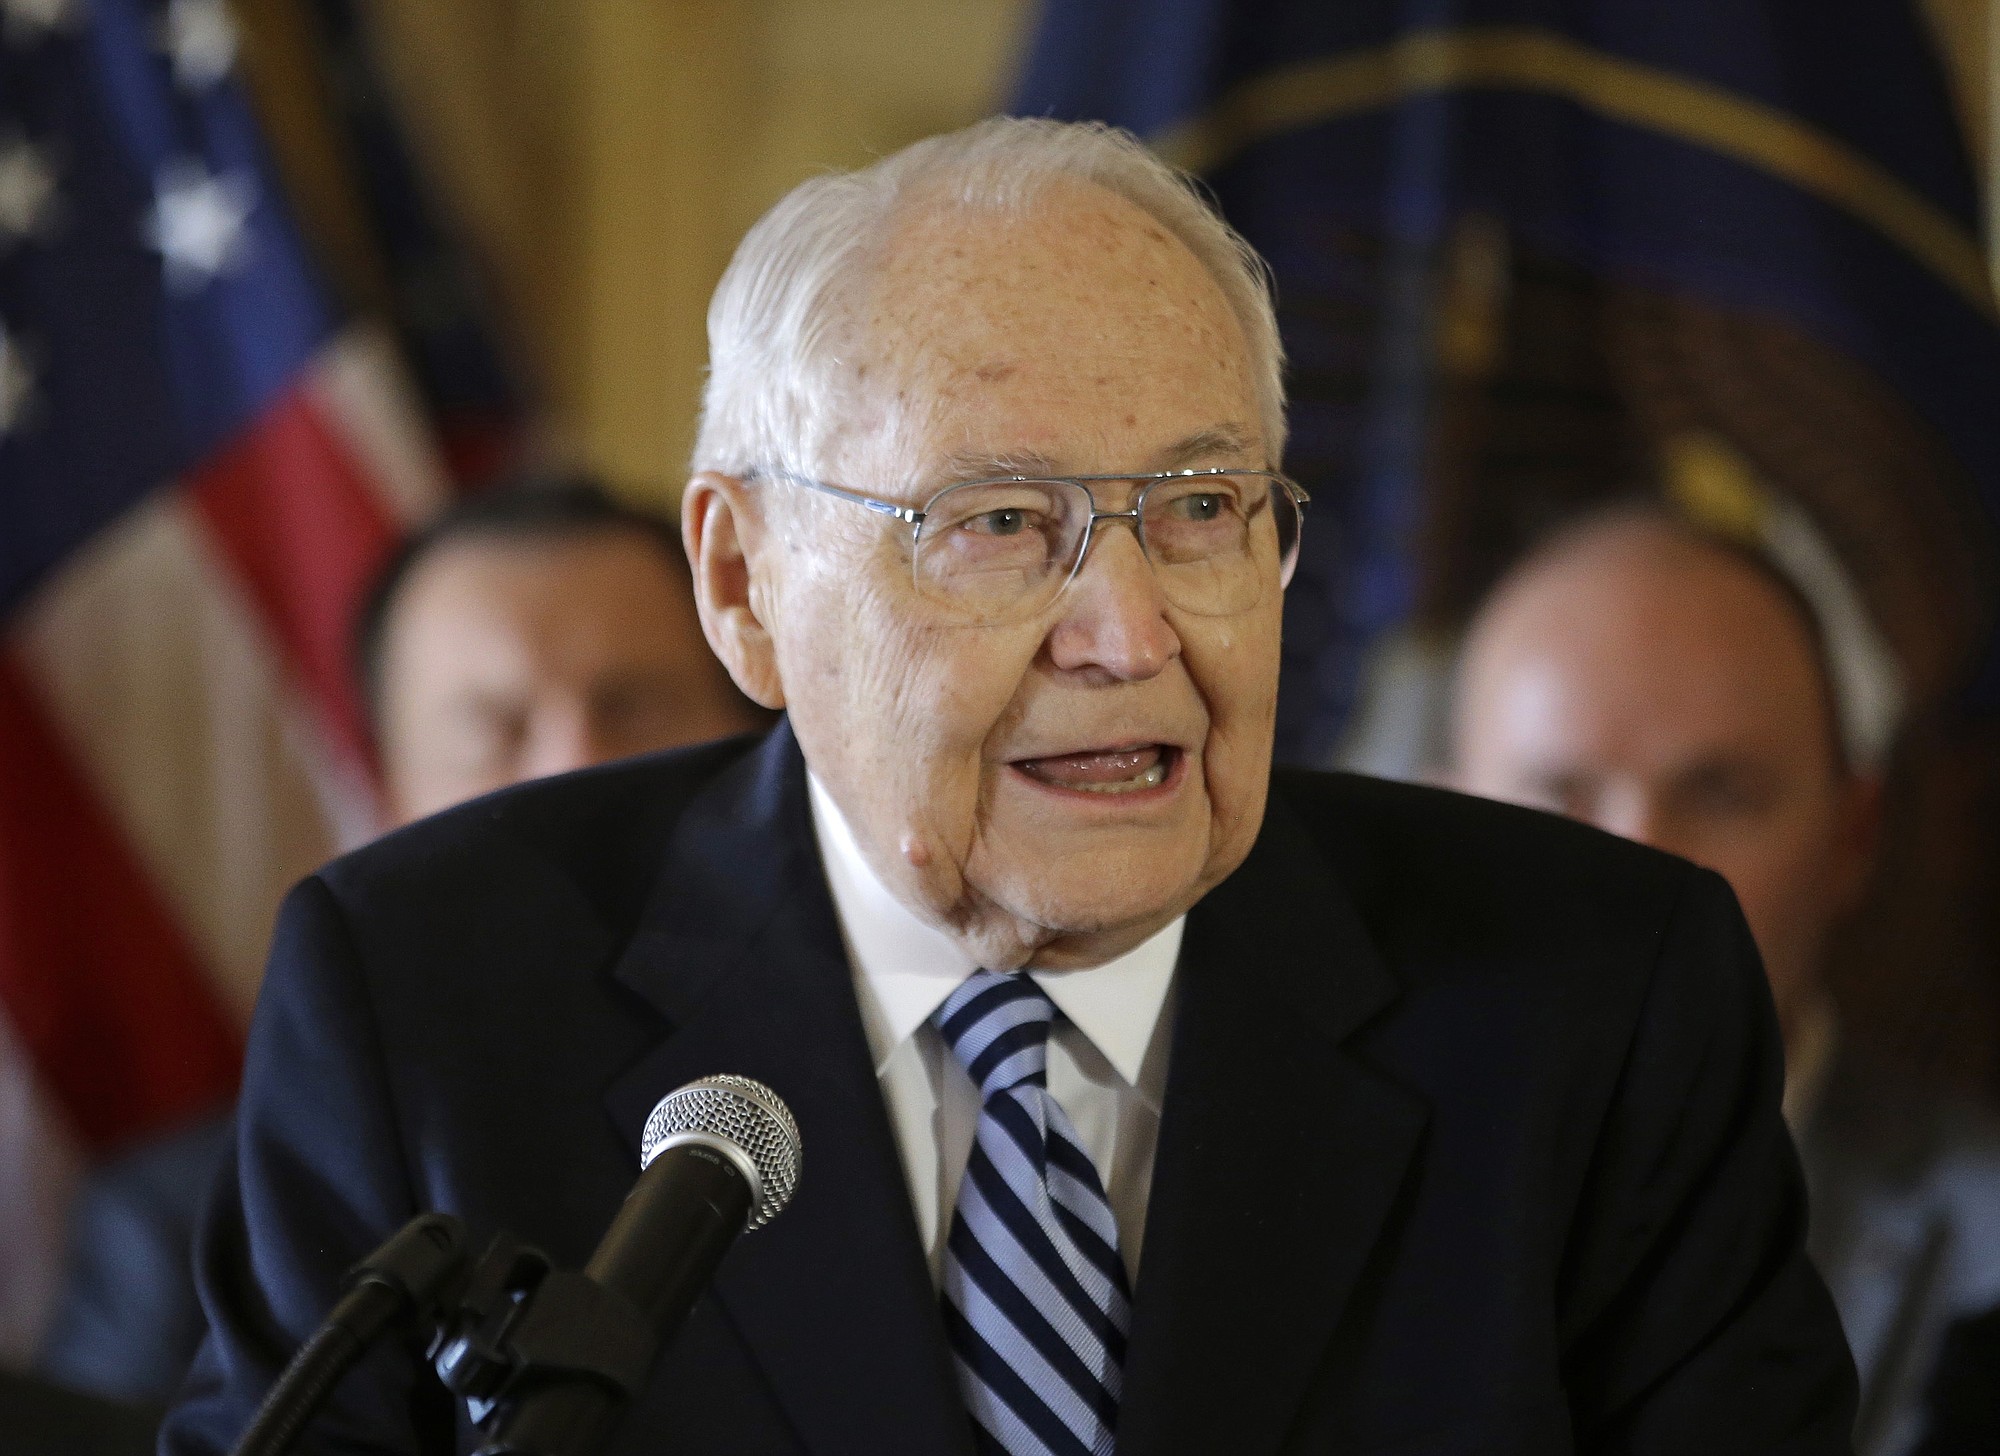 L. Tom Perry, the second-most senior member of the high-level Mormon governing body called the Quorum of the Twelve Apostles, speaks March 4 during a news conference at the Utah State Capitol, in Salt Lake City. Mormon church officials say Perry, one of the highest-ranking leaders of the faith, is headed to hospice as his cancer spreads aggressively.